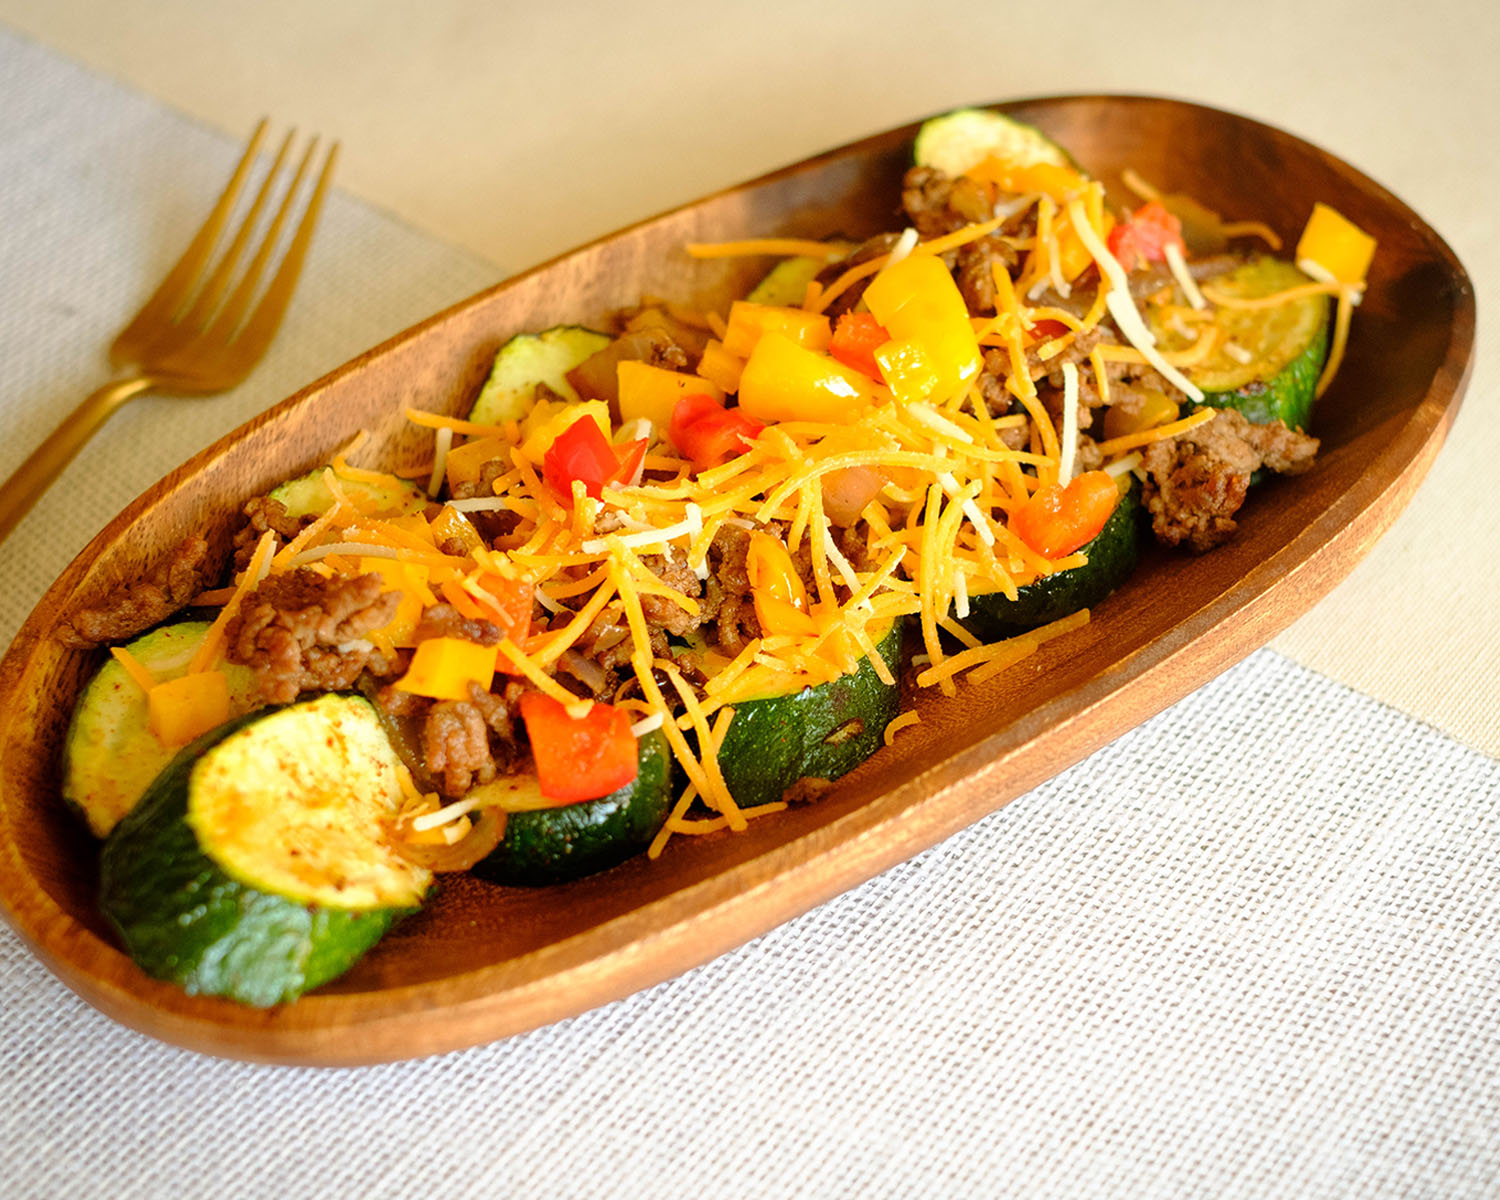 wooden plate with sliced zucchini topped with ground beef, bell peppers, tomatoes, and shredded cheese